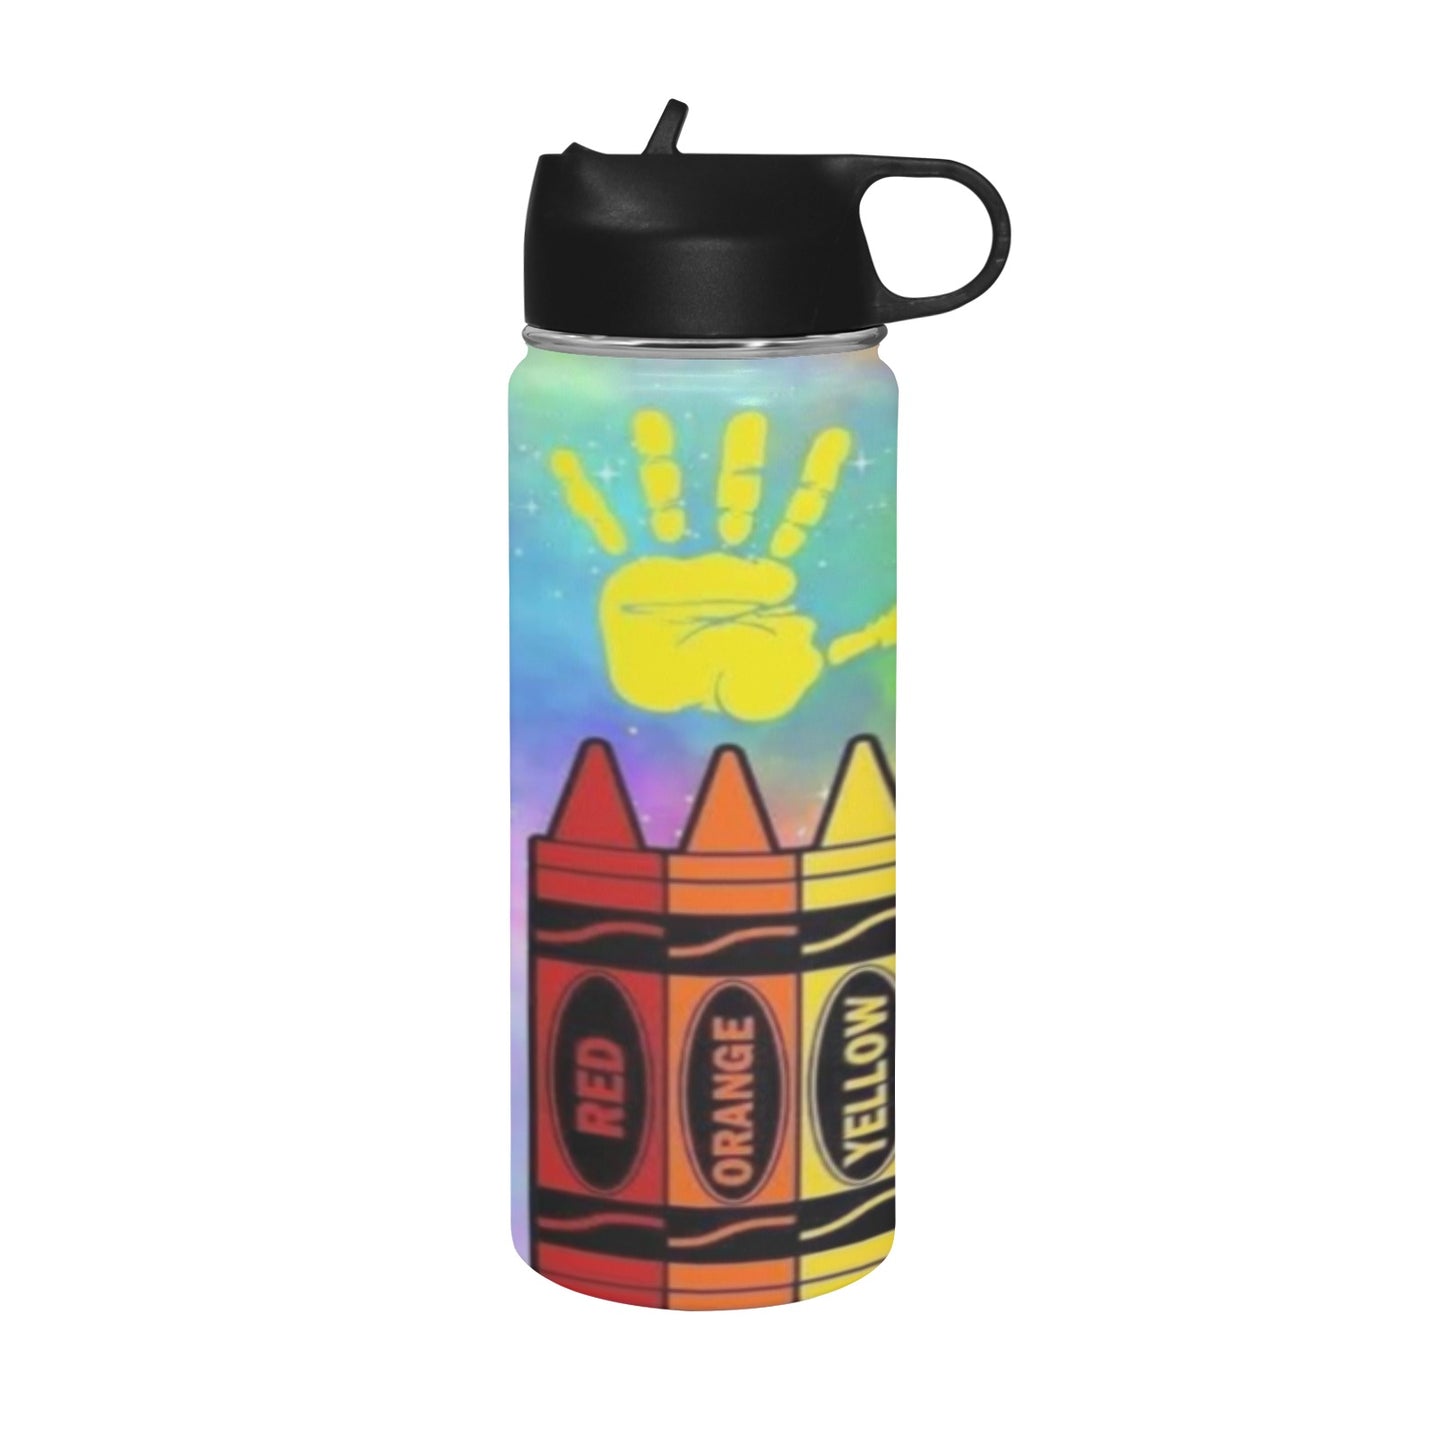 Composition Book Insulated Water Bottle with Straw Lid (18 oz)